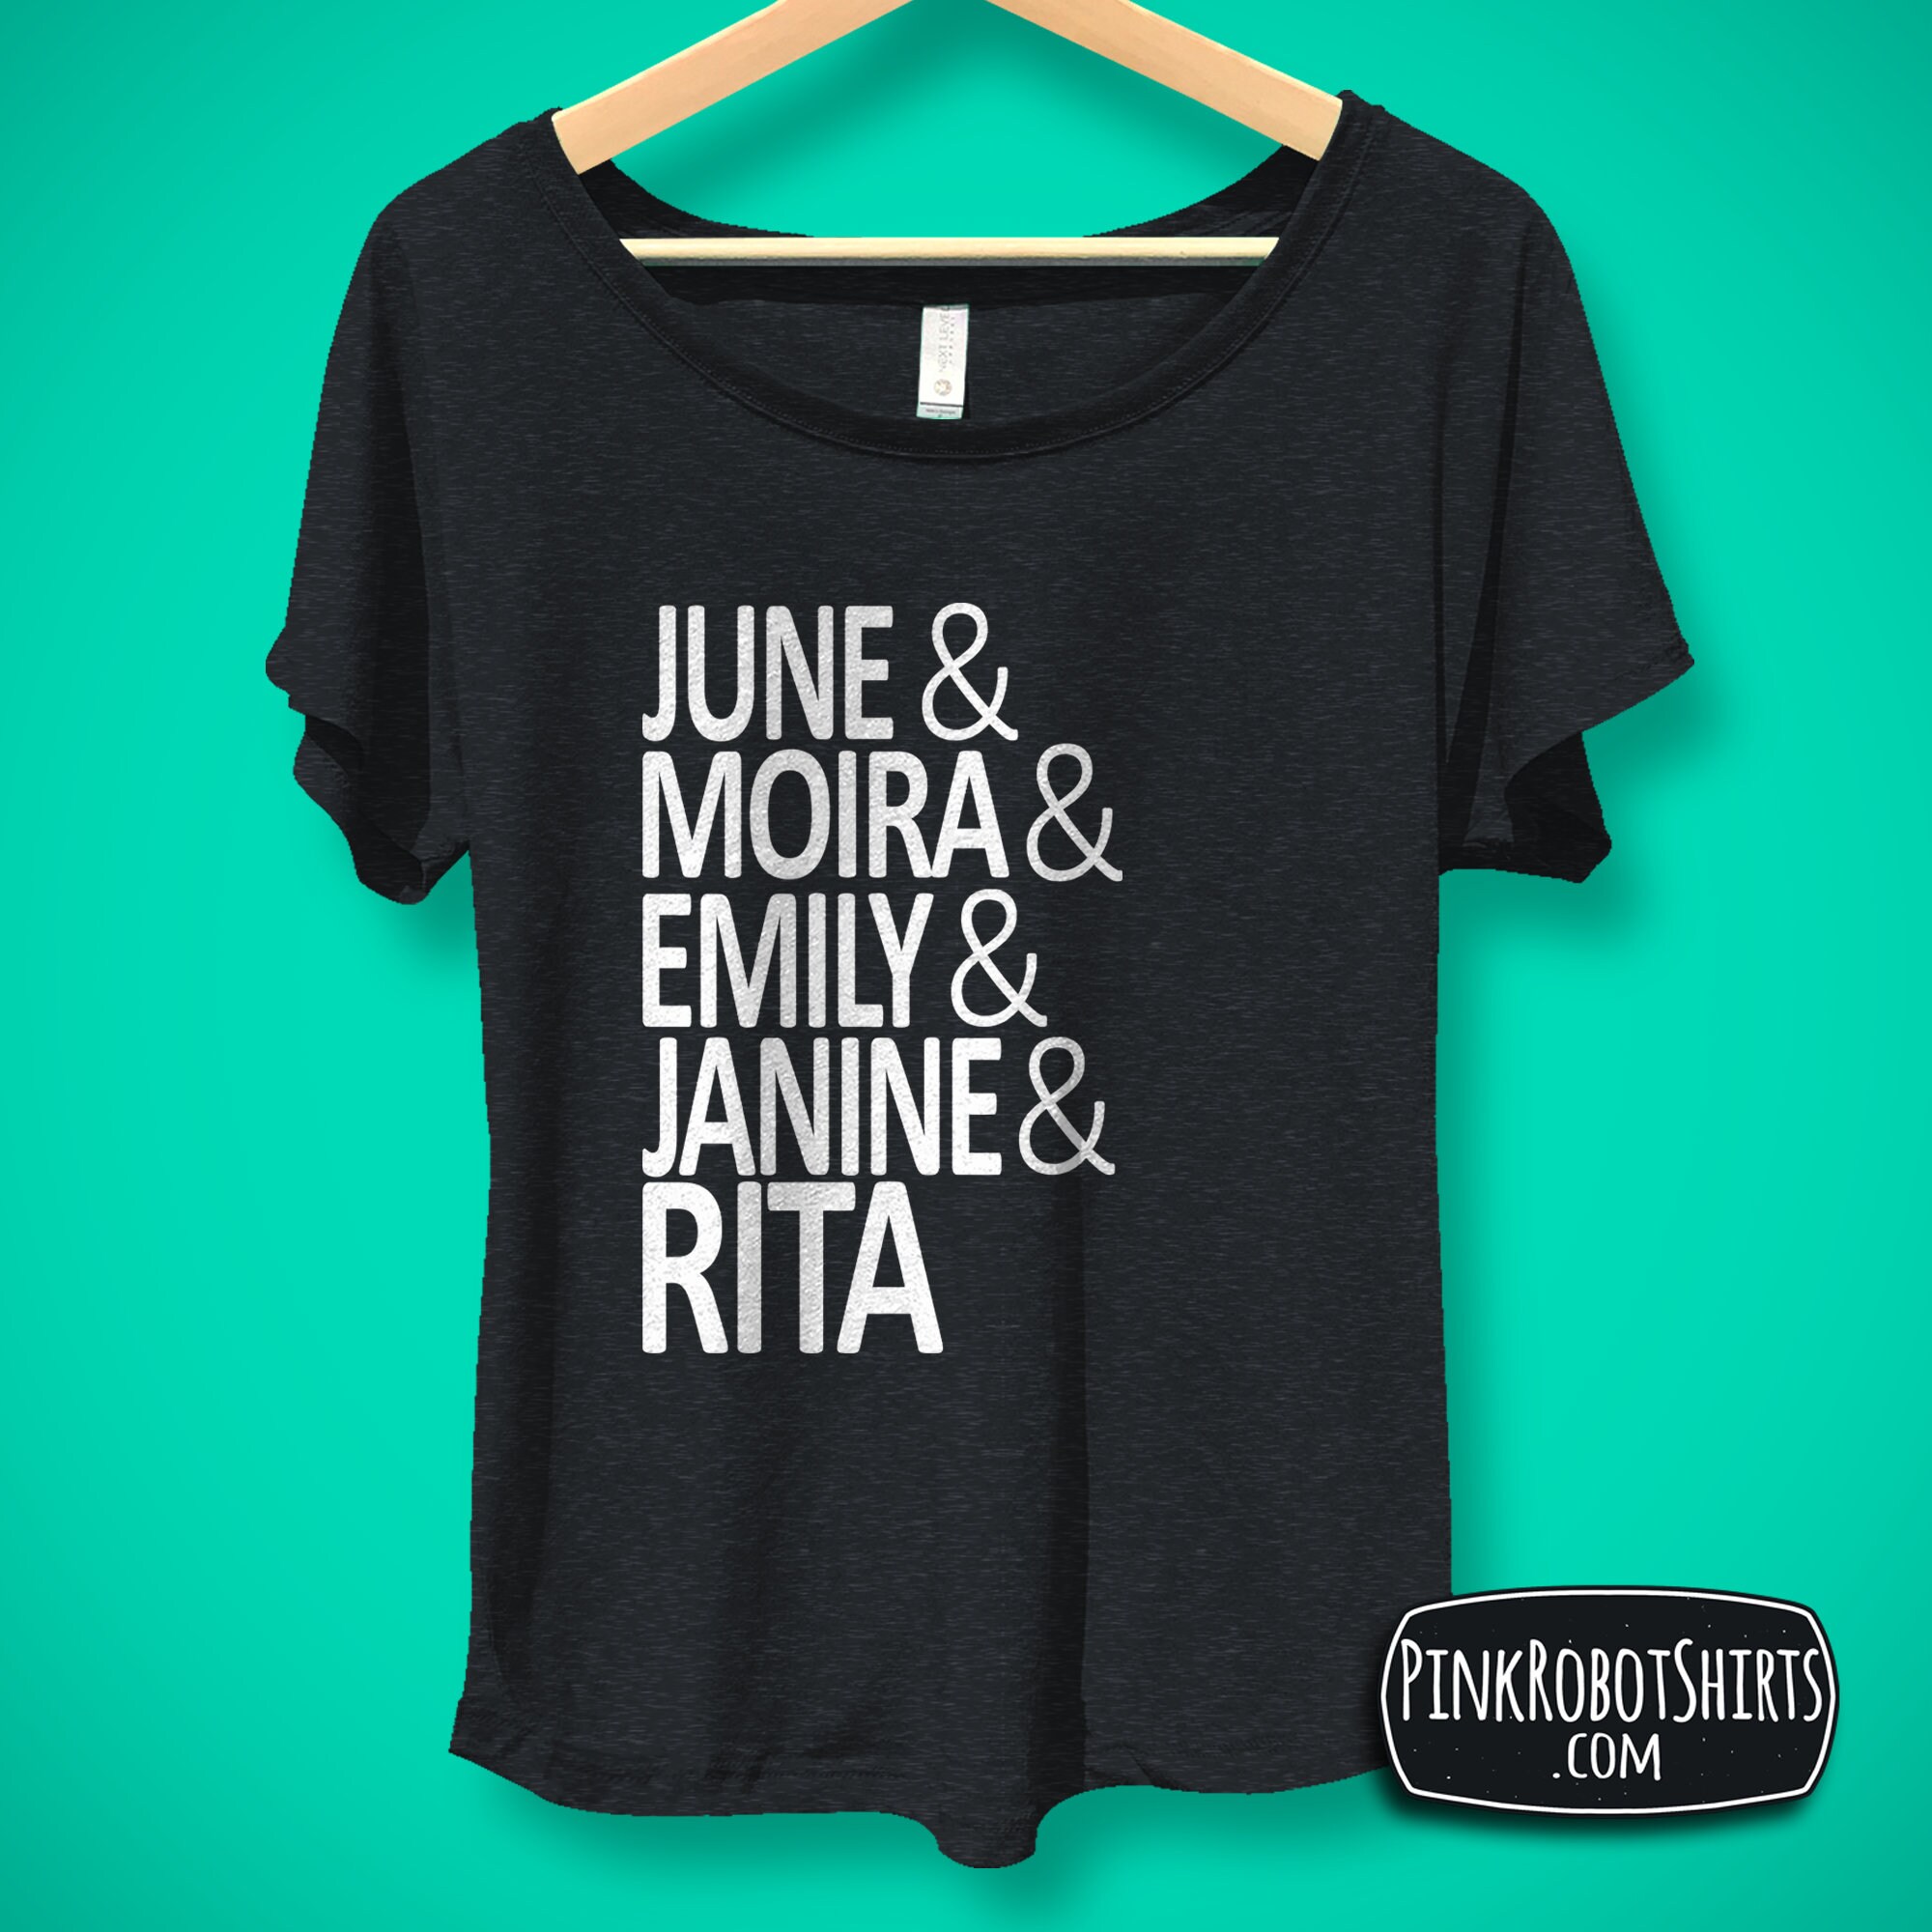 Handmaids Tale Shirt The Handmaid'S Tale Shirt June And Moira And Emily And Janine And Rita Shirt Resistance Goals Shirt